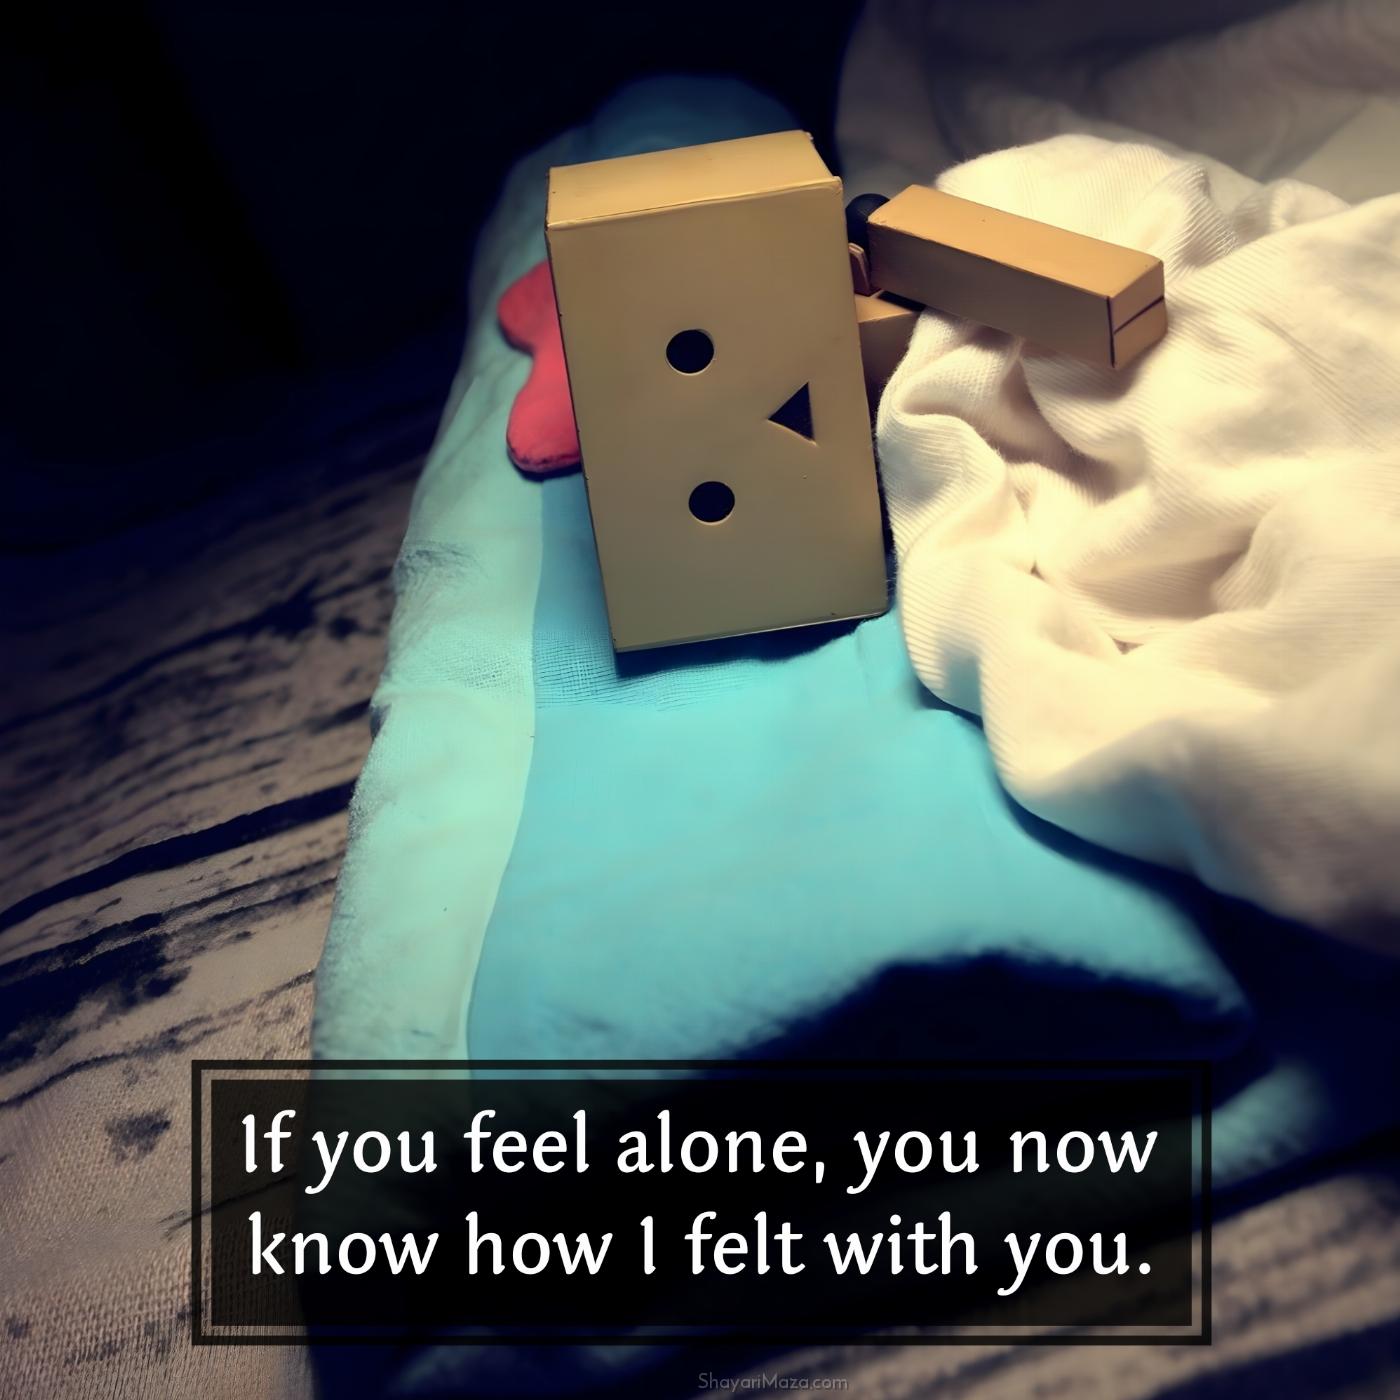 If you feel alone you now know how I felt with you